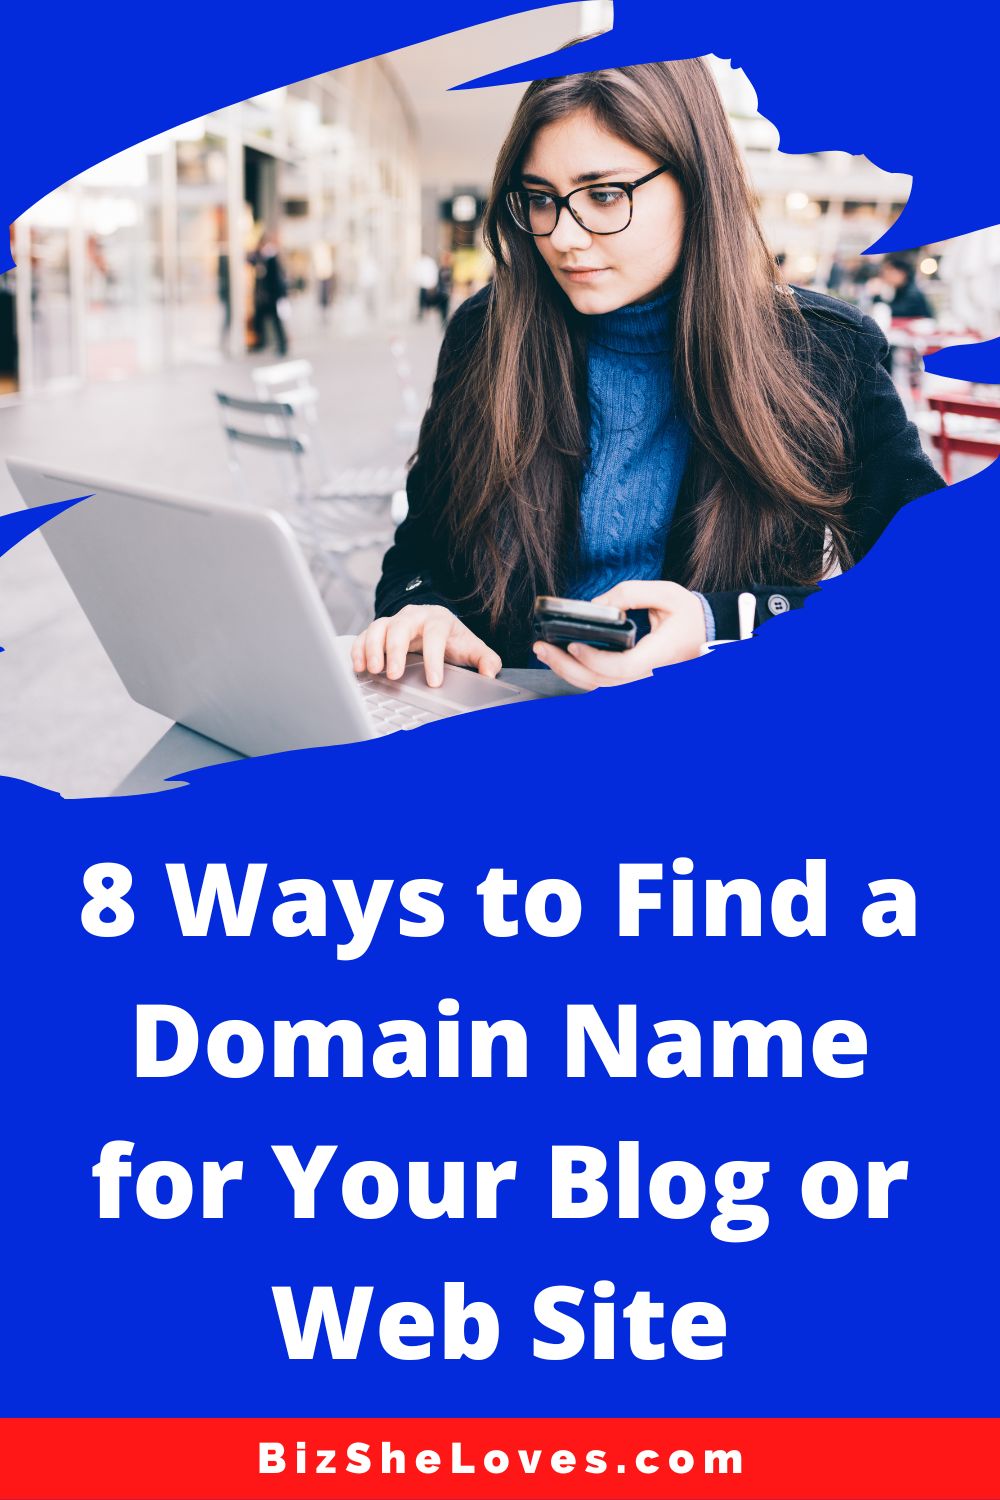 Domain Name Ideas: 8 Ways to Find a Domain Name for Your Blog or Web Site